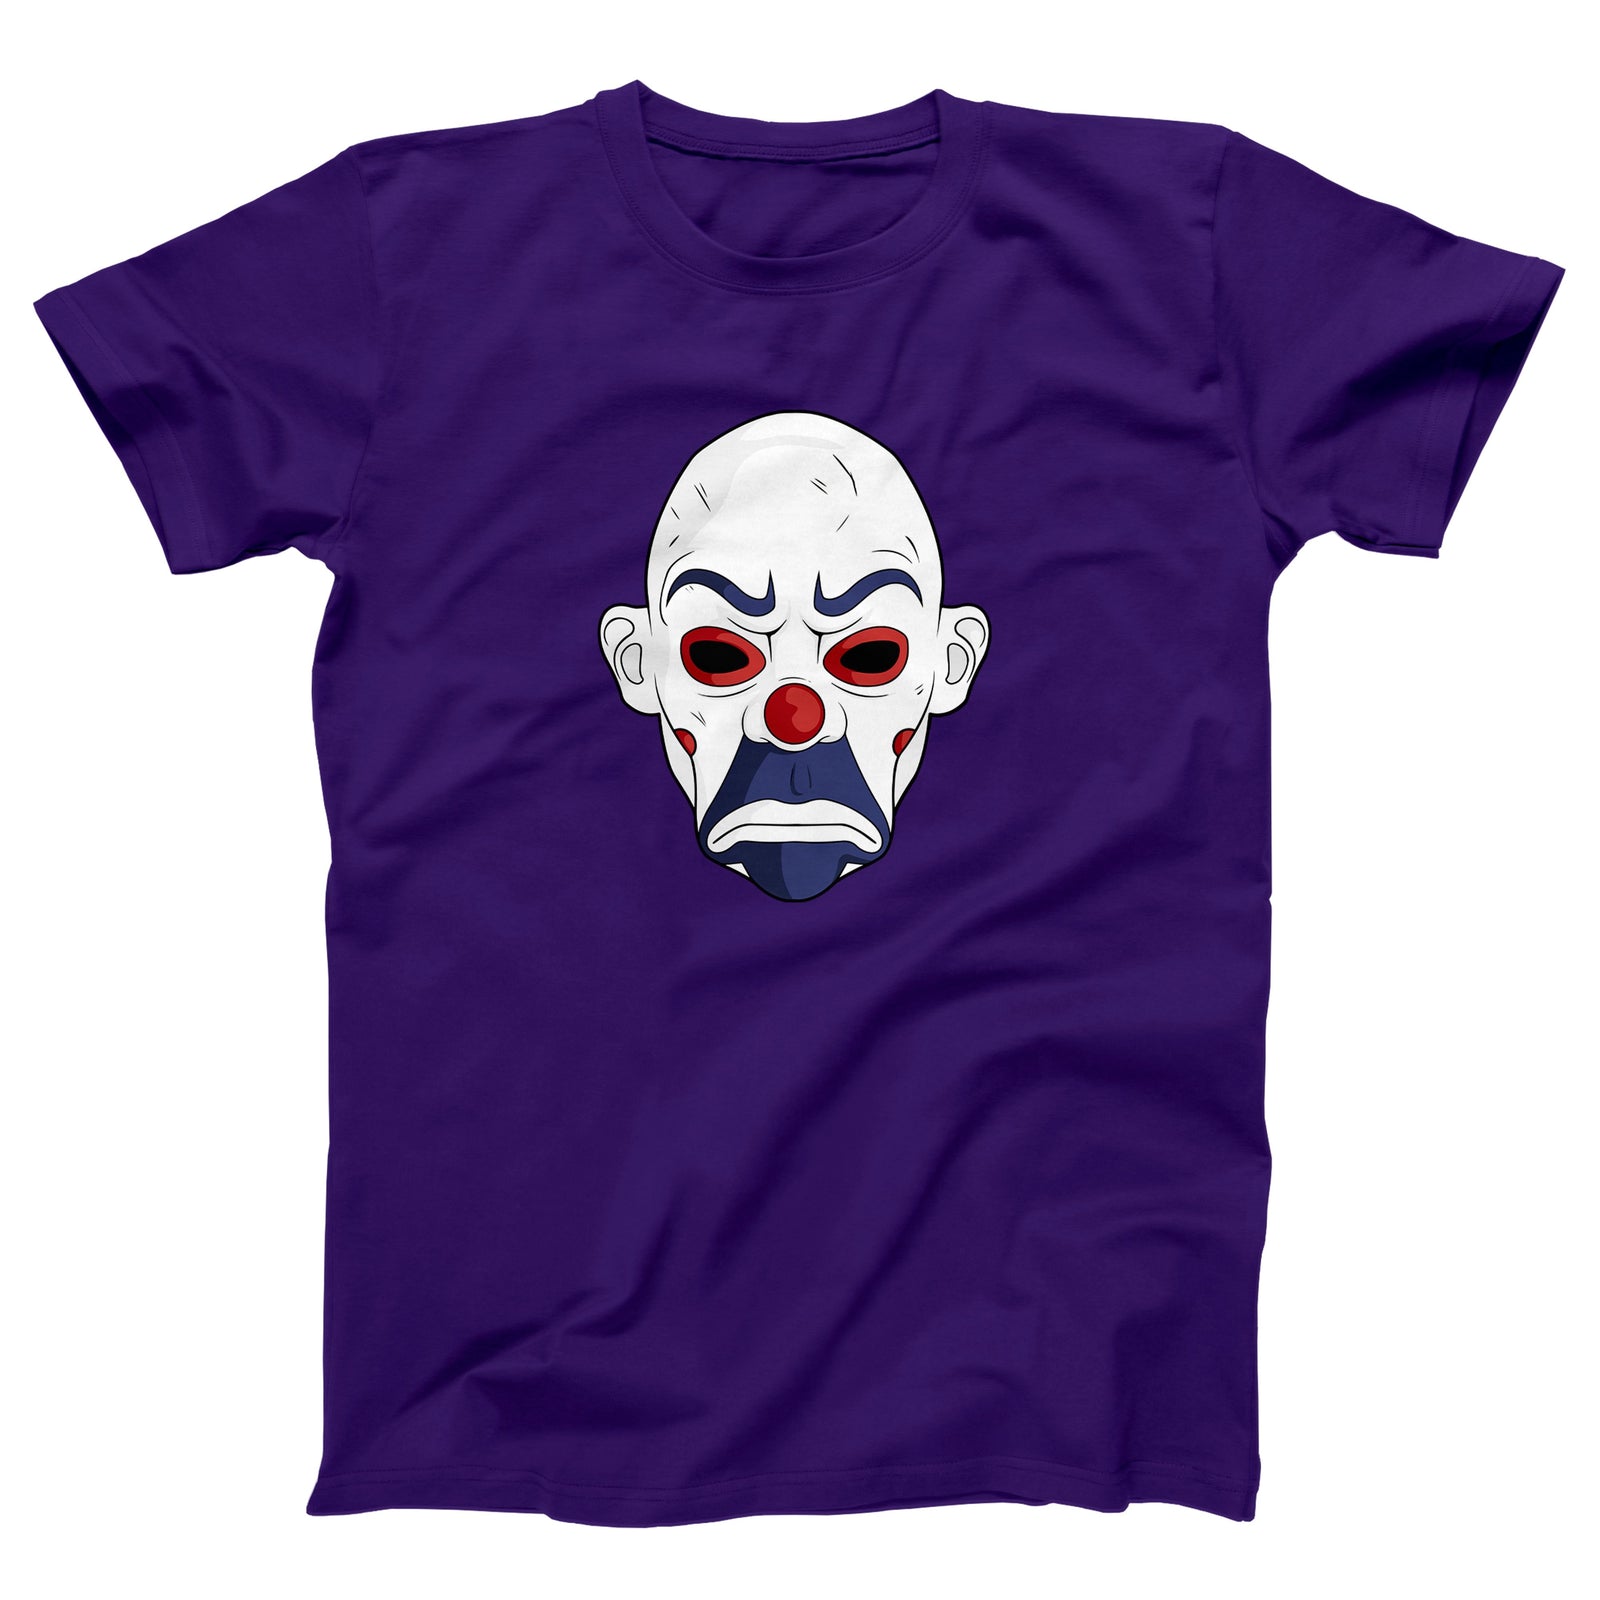 //cdn.shopify.com/s/files/1/0274/2488/2766/products/clown-mask-menunisex-t-shirt-953298_5000x.jpg?v=1625744481 5000w,
    //cdn.shopify.com/s/files/1/0274/2488/2766/products/clown-mask-menunisex-t-shirt-953298_4500x.jpg?v=1625744481 4500w,
    //cdn.shopify.com/s/files/1/0274/2488/2766/products/clown-mask-menunisex-t-shirt-953298_4000x.jpg?v=1625744481 4000w,
    //cdn.shopify.com/s/files/1/0274/2488/2766/products/clown-mask-menunisex-t-shirt-953298_3500x.jpg?v=1625744481 3500w,
    //cdn.shopify.com/s/files/1/0274/2488/2766/products/clown-mask-menunisex-t-shirt-953298_3000x.jpg?v=1625744481 3000w,
    //cdn.shopify.com/s/files/1/0274/2488/2766/products/clown-mask-menunisex-t-shirt-953298_2500x.jpg?v=1625744481 2500w,
    //cdn.shopify.com/s/files/1/0274/2488/2766/products/clown-mask-menunisex-t-shirt-953298_2000x.jpg?v=1625744481 2000w,
    //cdn.shopify.com/s/files/1/0274/2488/2766/products/clown-mask-menunisex-t-shirt-953298_1800x.jpg?v=1625744481 1800w,
    //cdn.shopify.com/s/files/1/0274/2488/2766/products/clown-mask-menunisex-t-shirt-953298_1600x.jpg?v=1625744481 1600w,
    //cdn.shopify.com/s/files/1/0274/2488/2766/products/clown-mask-menunisex-t-shirt-953298_1400x.jpg?v=1625744481 1400w,
    //cdn.shopify.com/s/files/1/0274/2488/2766/products/clown-mask-menunisex-t-shirt-953298_1200x.jpg?v=1625744481 1200w,
    //cdn.shopify.com/s/files/1/0274/2488/2766/products/clown-mask-menunisex-t-shirt-953298_1000x.jpg?v=1625744481 1000w,
    //cdn.shopify.com/s/files/1/0274/2488/2766/products/clown-mask-menunisex-t-shirt-953298_800x.jpg?v=1625744481 800w,
    //cdn.shopify.com/s/files/1/0274/2488/2766/products/clown-mask-menunisex-t-shirt-953298_600x.jpg?v=1625744481 600w,
    //cdn.shopify.com/s/files/1/0274/2488/2766/products/clown-mask-menunisex-t-shirt-953298_400x.jpg?v=1625744481 400w,
    //cdn.shopify.com/s/files/1/0274/2488/2766/products/clown-mask-menunisex-t-shirt-953298_200x.jpg?v=1625744481 200w